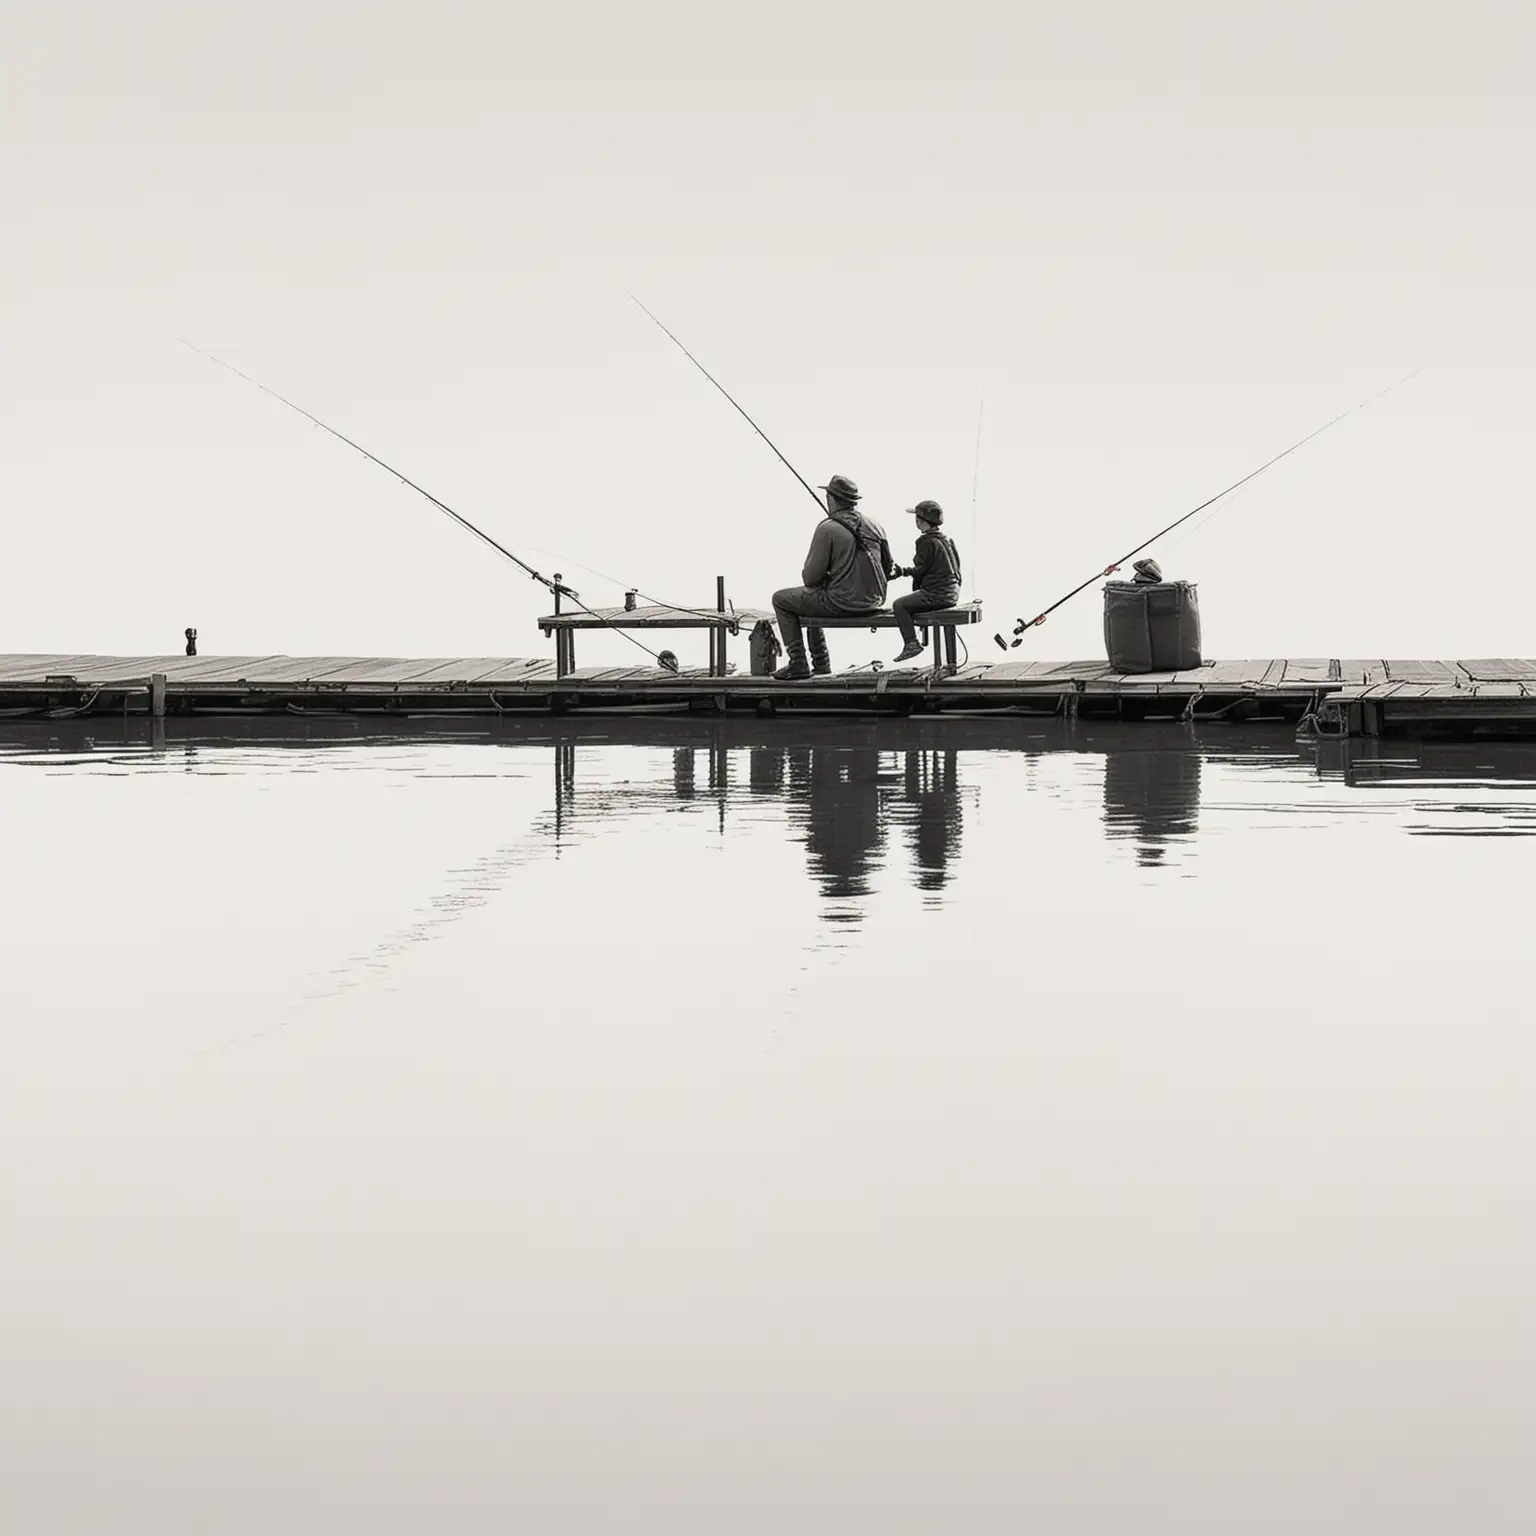 SVG of father and child sitting on a dock
while fishing, simplistic, plain white background, minimalistic, no background imagery, one fishing rod for each character
